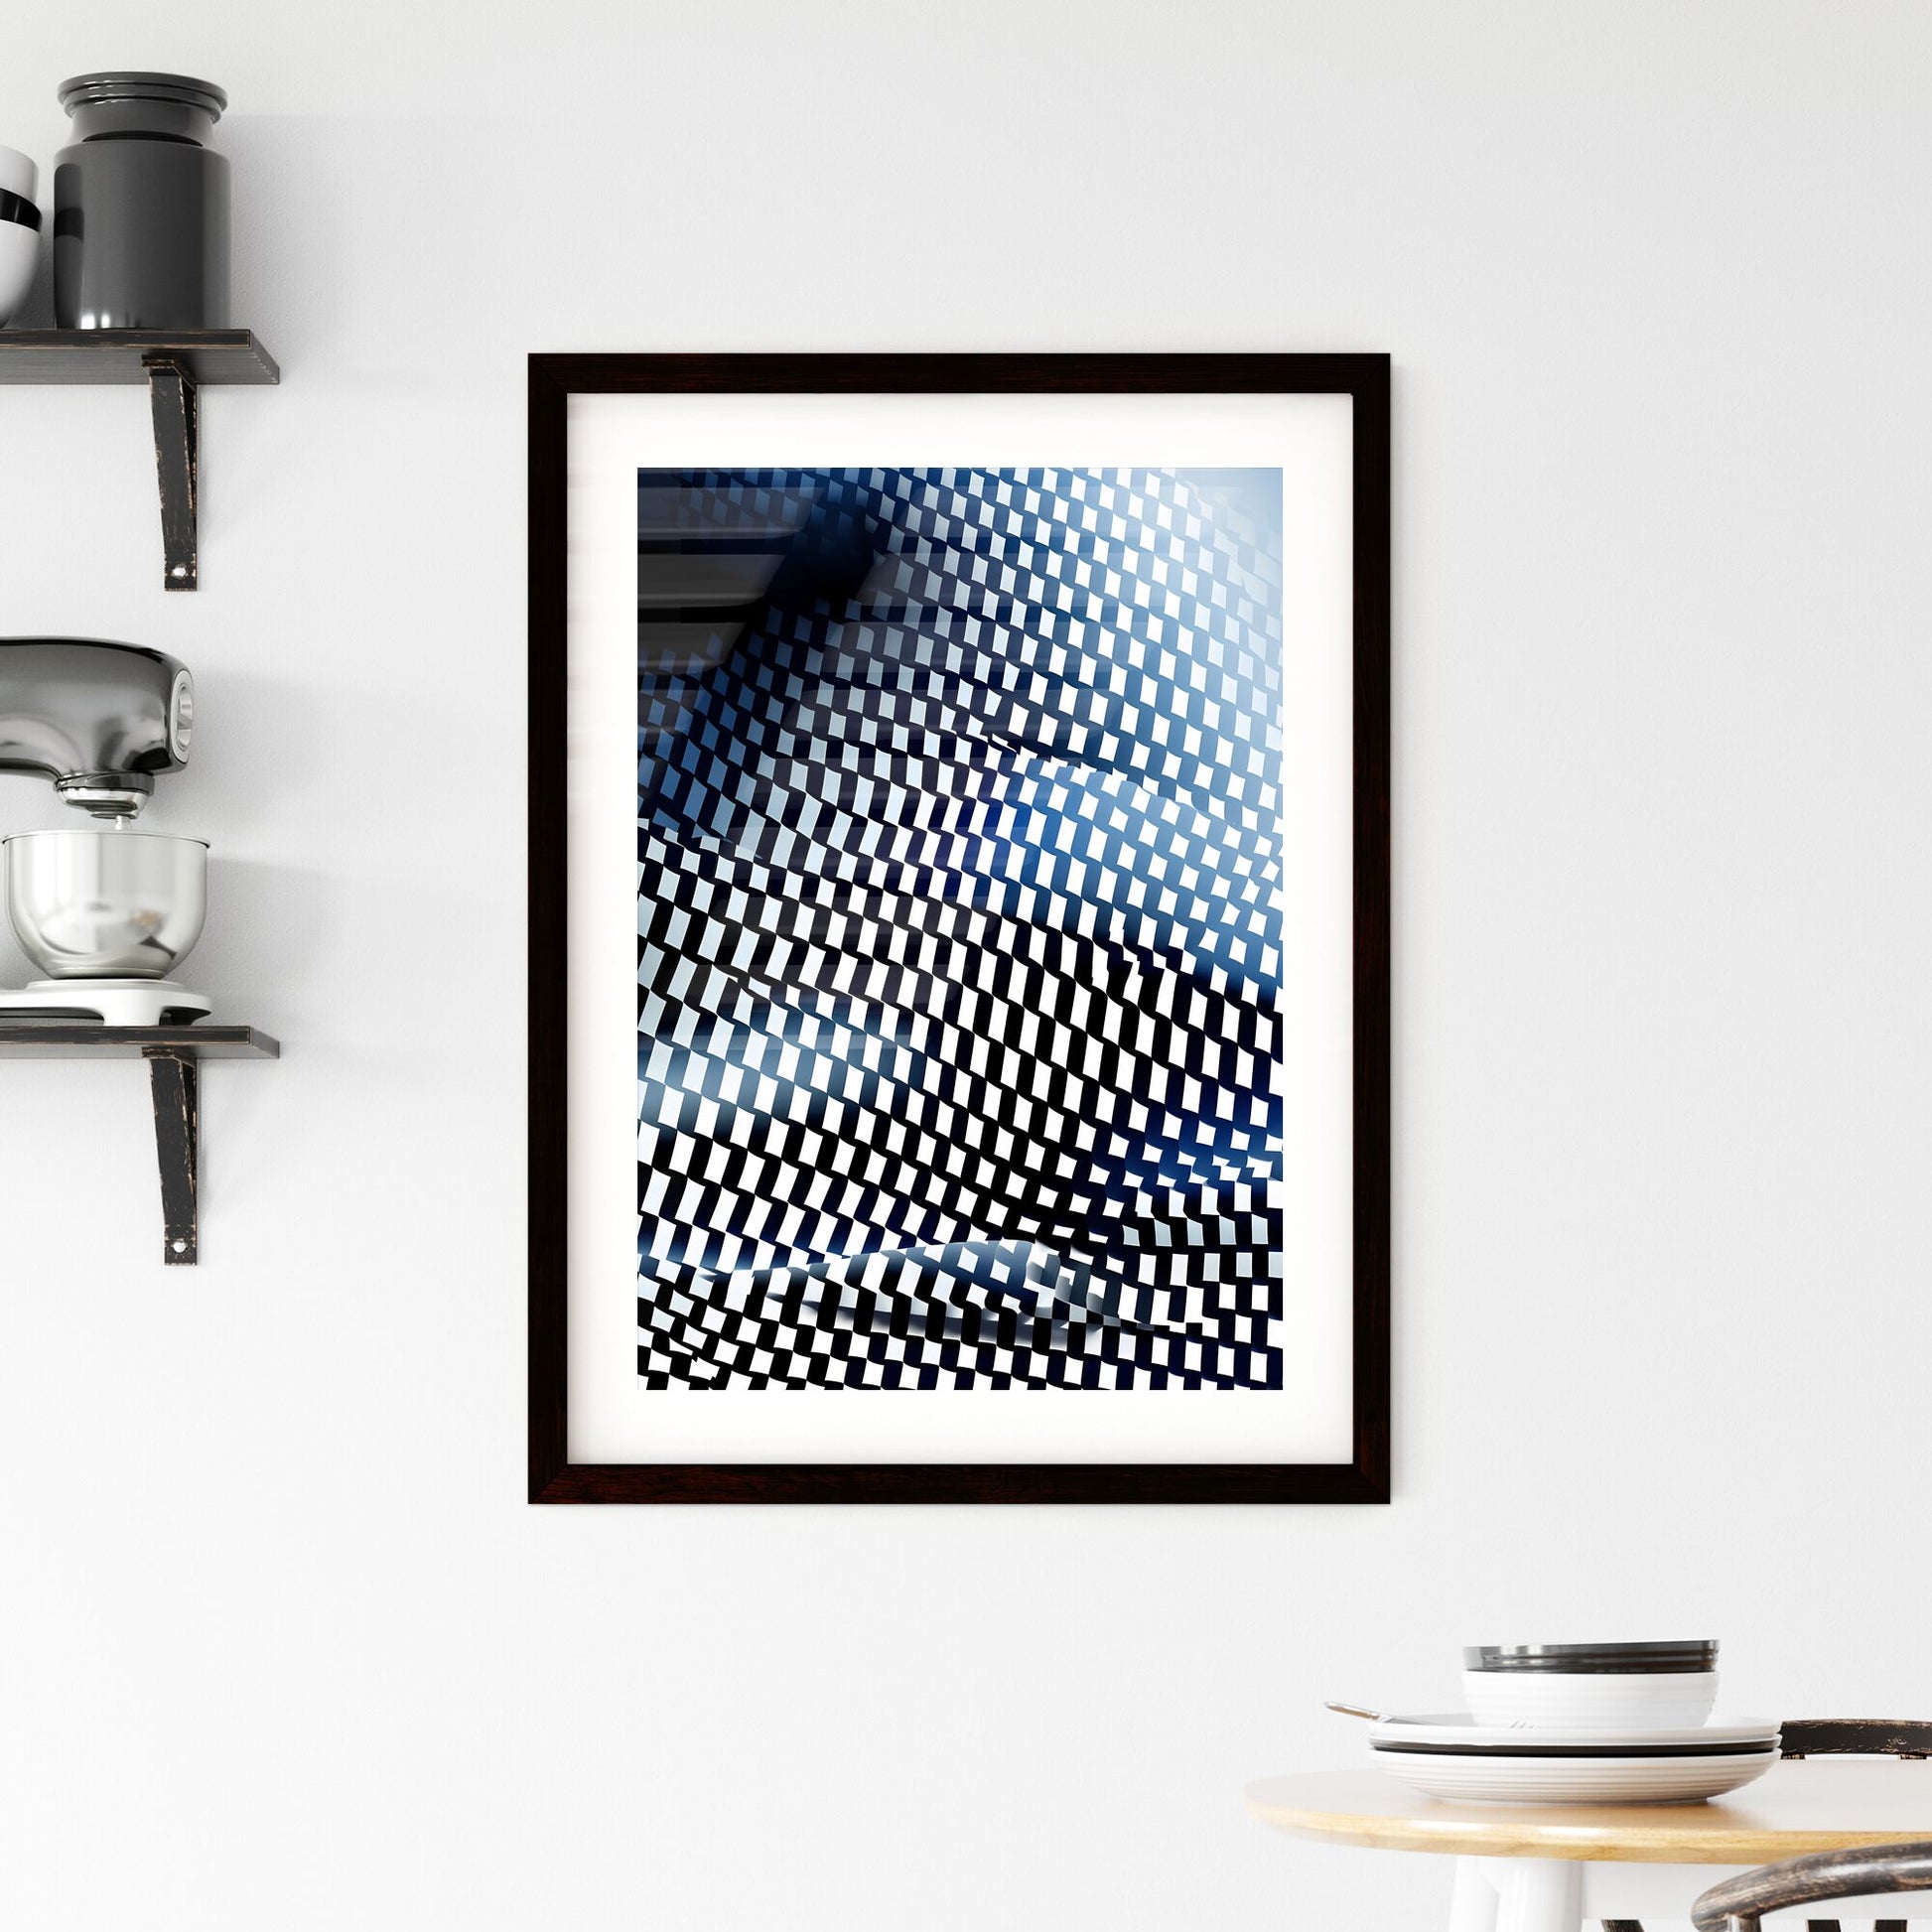 A Poster of halftone pattern - A Black And White Checkered Pattern Default Title